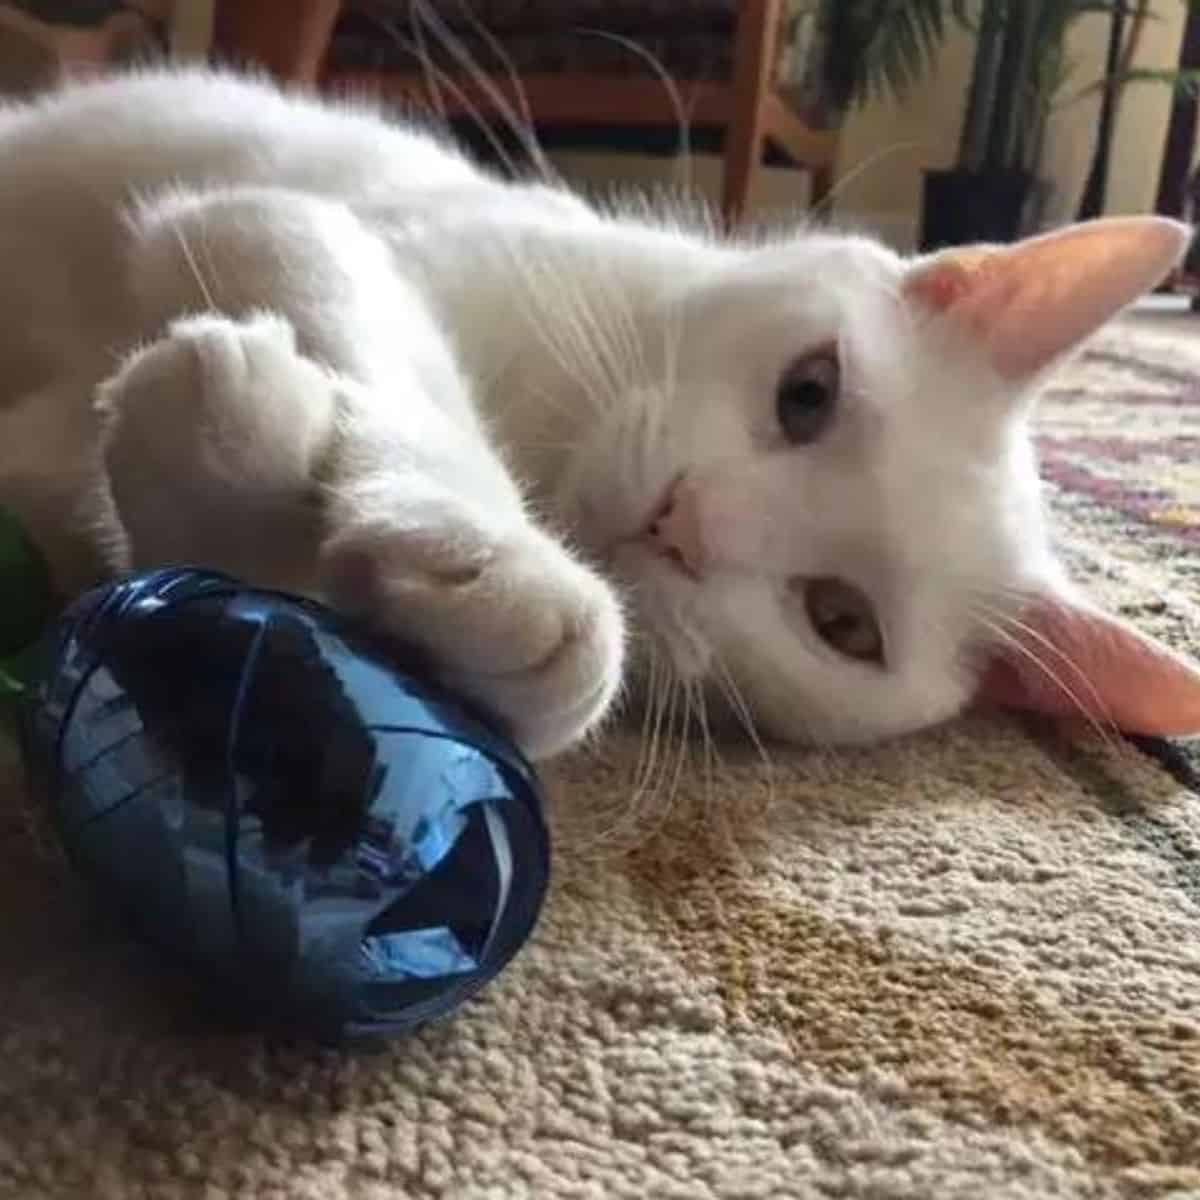 the cat is lying on the floor and playing with a ball